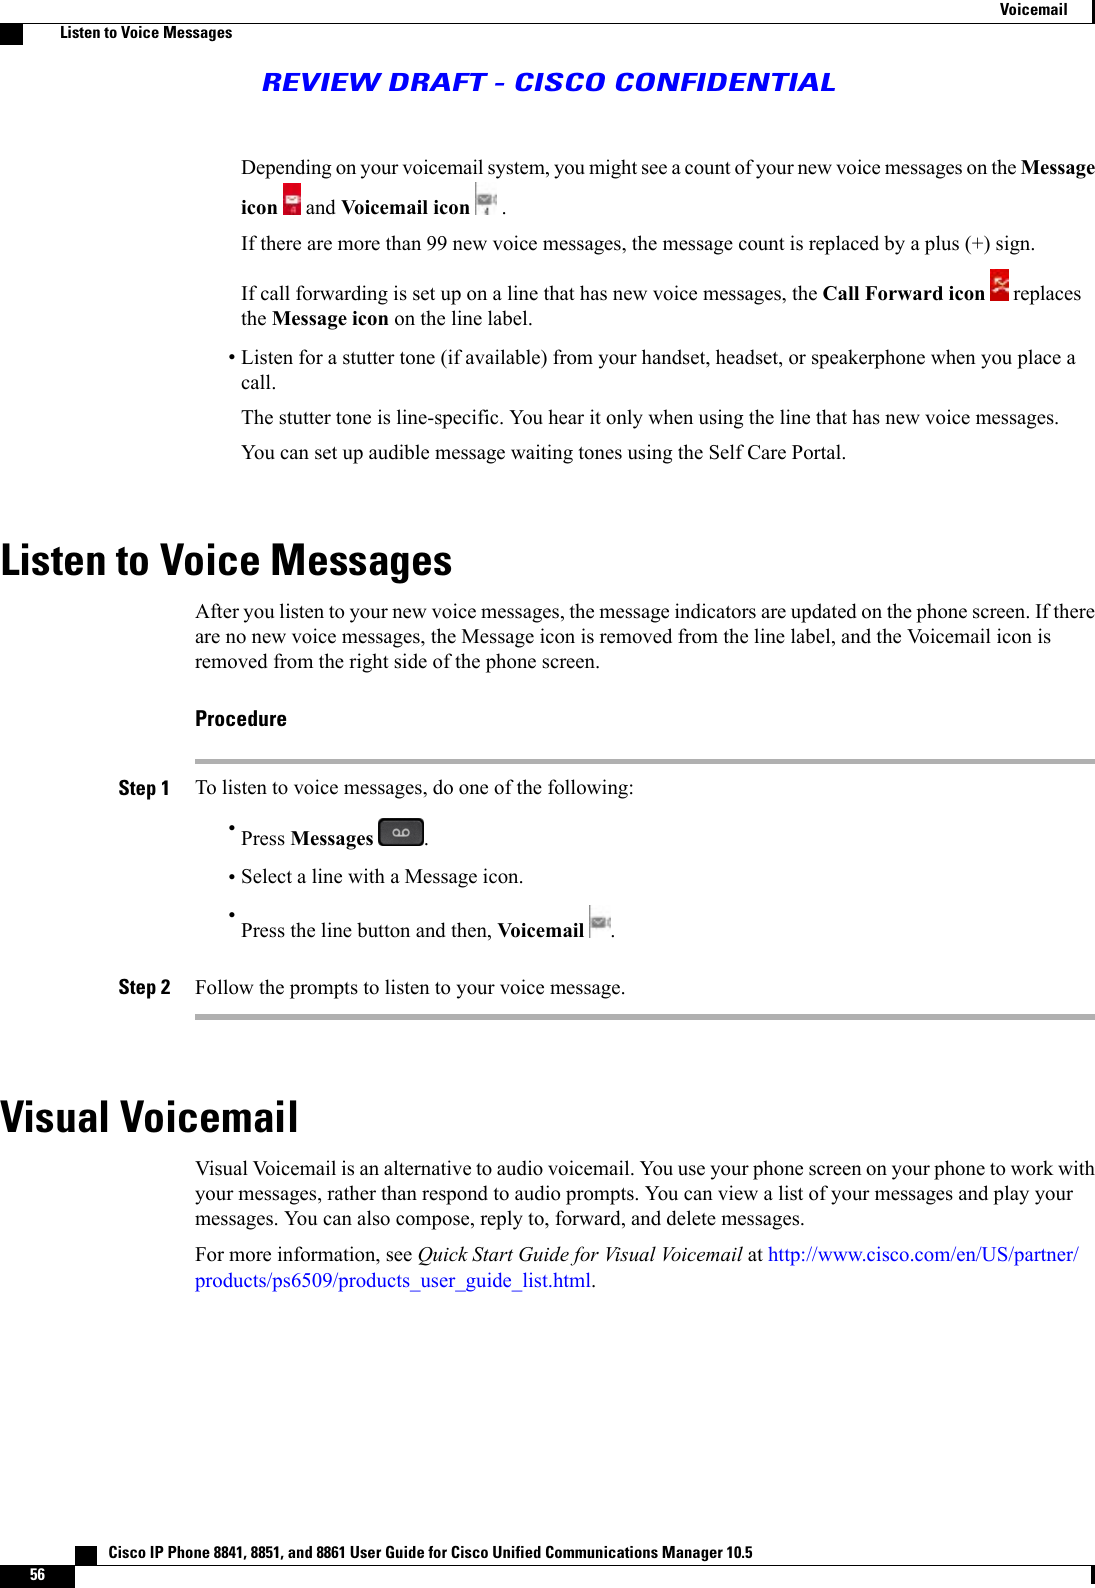 Depending on your voicemail system, you might see a count of your new voice messages on the Messageicon and Voicemail icon .If there are more than 99 new voice messages, the message count is replaced by a plus (+) sign.If call forwarding is set up on a line that has new voice messages, the Call Forward icon replacesthe Message icon on the line label.•Listen for a stutter tone (if available) from your handset, headset, or speakerphone when you place acall.The stutter tone is line-specific. You hear it only when using the line that has new voice messages.You can set up audible message waiting tones using the Self Care Portal.Listen to Voice MessagesAfter you listen to your new voice messages, the message indicators are updated on the phone screen. If thereare no new voice messages, the Message icon is removed from the line label, and the Voicemail icon isremoved from the right side of the phone screen.ProcedureStep 1 To listen to voice messages, do one of the following:•Press Messages .•Select a line with a Message icon.•Press the line button and then, Voicemail .Step 2 Follow the prompts to listen to your voice message.Visual VoicemailVisual Voicemail is an alternative to audio voicemail. You use your phone screen on your phone to work withyour messages, rather than respond to audio prompts. You can view a list of your messages and play yourmessages. You can also compose, reply to, forward, and delete messages.For more information, see Quick Start Guide for Visual Voicemail at http://www.cisco.com/en/US/partner/products/ps6509/products_user_guide_list.html.   Cisco IP Phone 8841, 8851, and 8861 User Guide for Cisco Unified Communications Manager 10.556VoicemailListen to Voice MessagesREVIEW DRAFT - CISCO CONFIDENTIAL